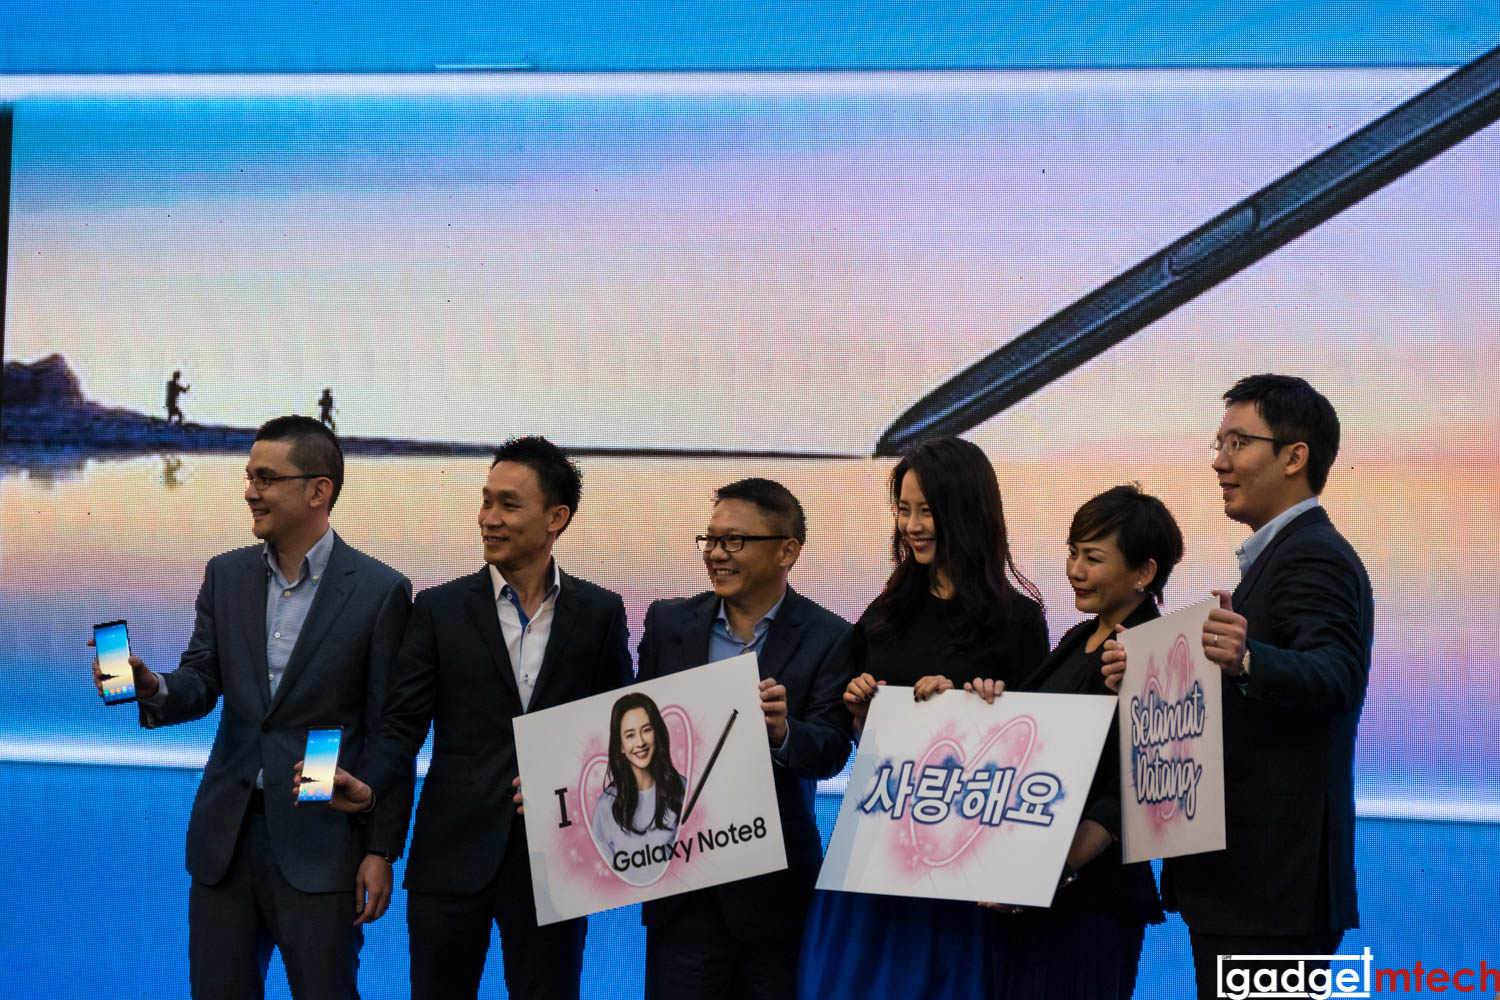 Samsung Galaxy Note8 Officially Launched in Malaysia